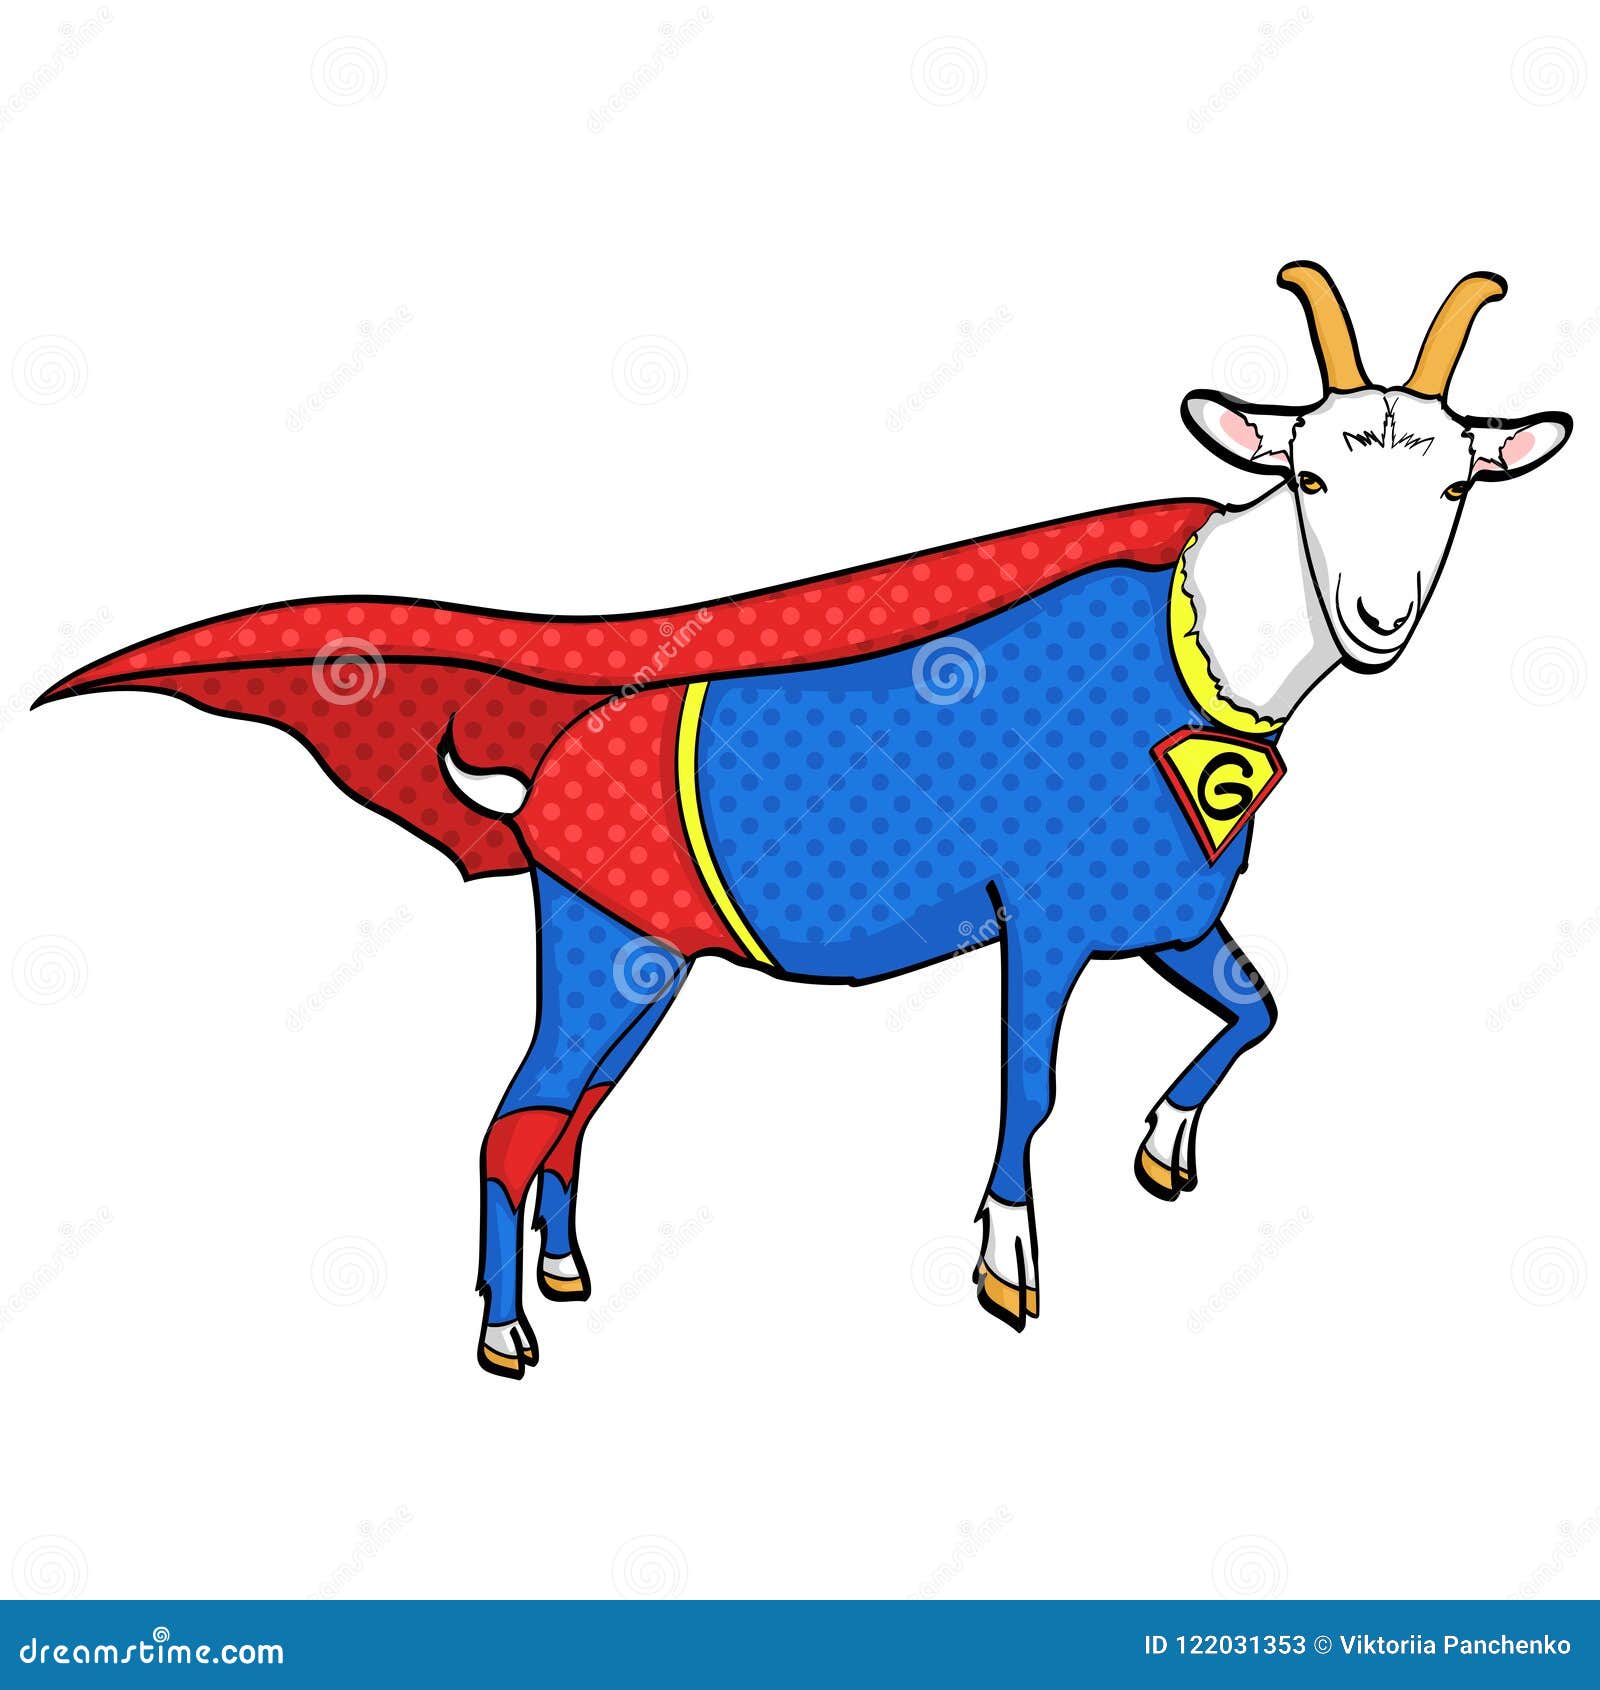  object on white background. flies goat animal dressed as superhero with clothes vigilante character. comic